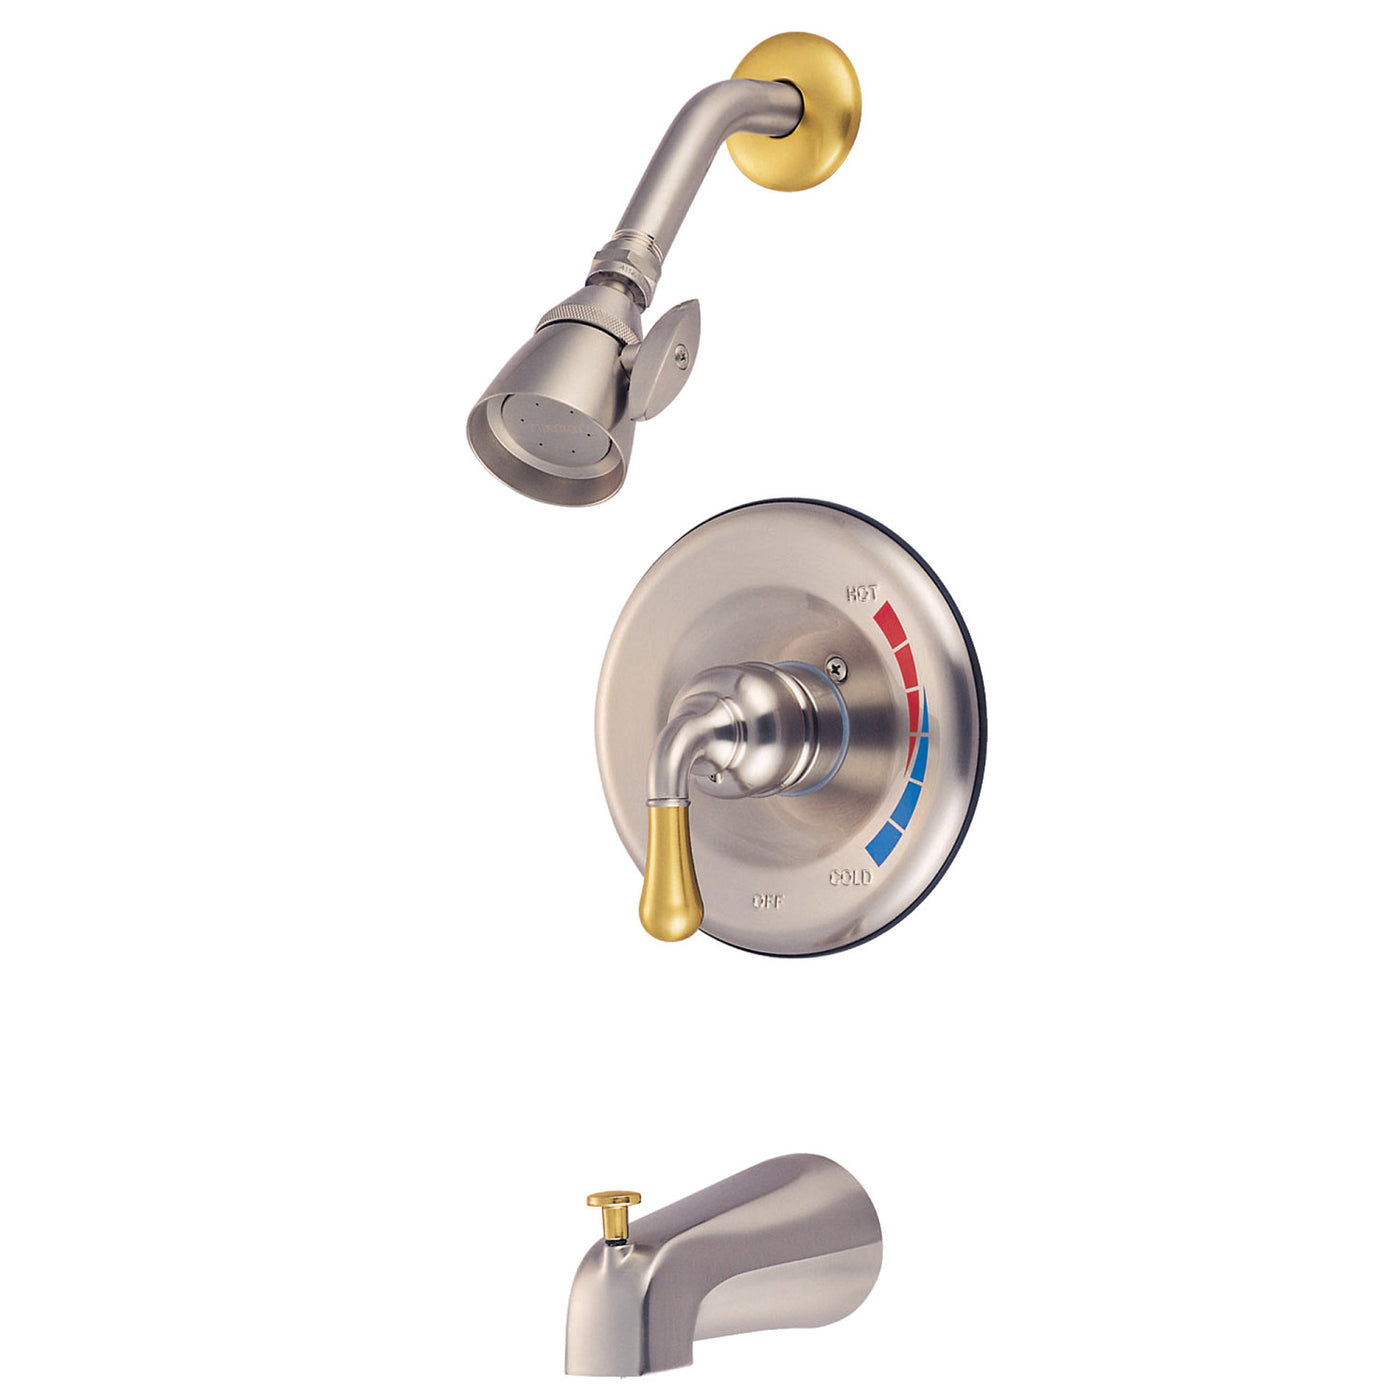 Elements of Design EB639 Single-Handle Tub and Shower Faucet, Brushed Nickel/Polished Brass